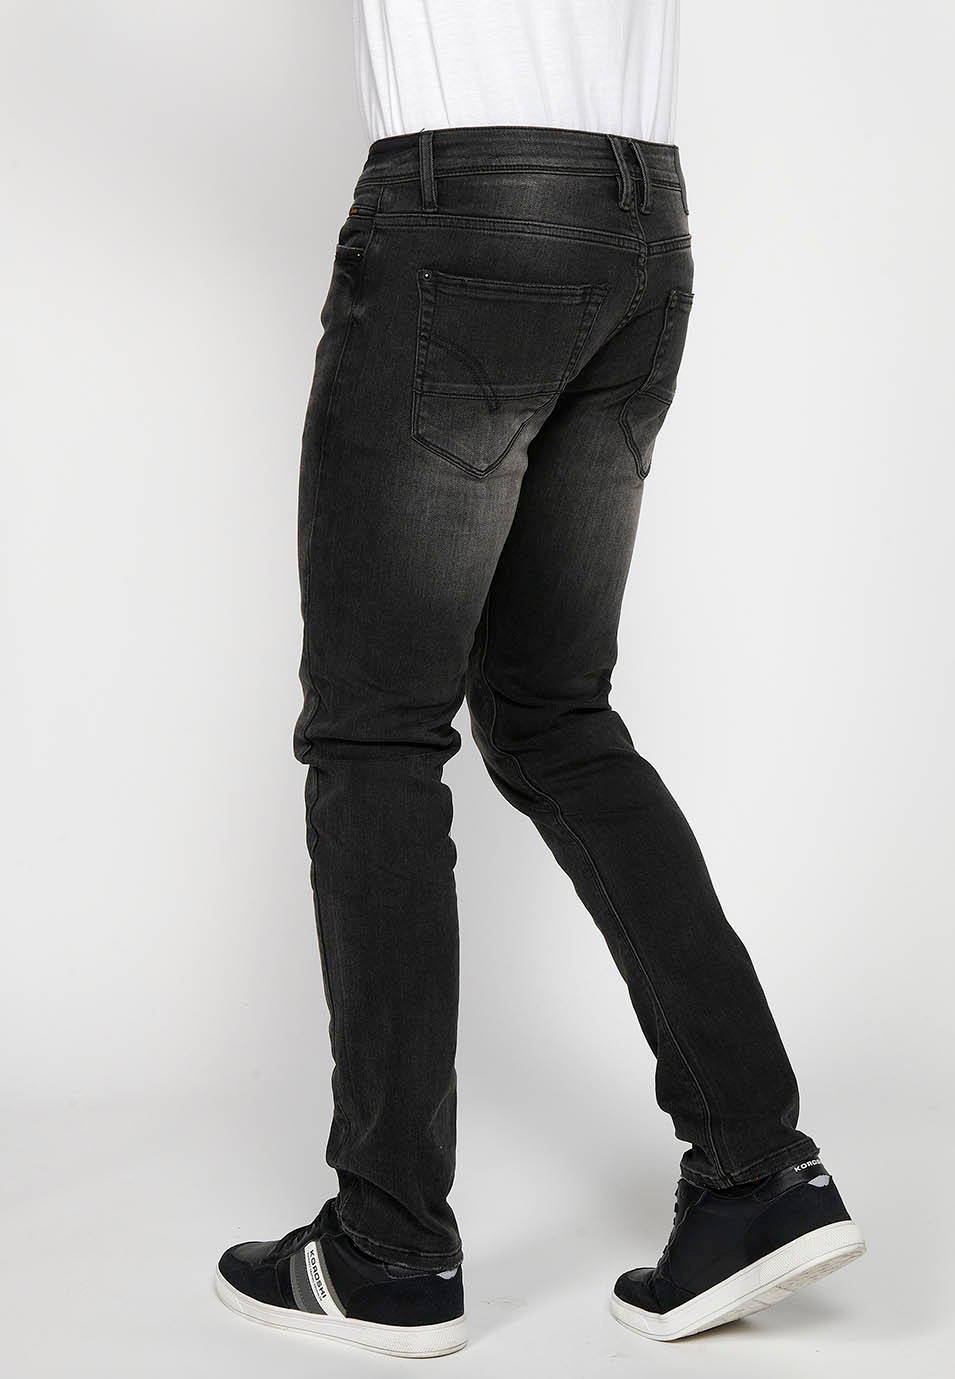 Regular fit long straight jeans with zipper and button front closure in Black Denim for Men 9